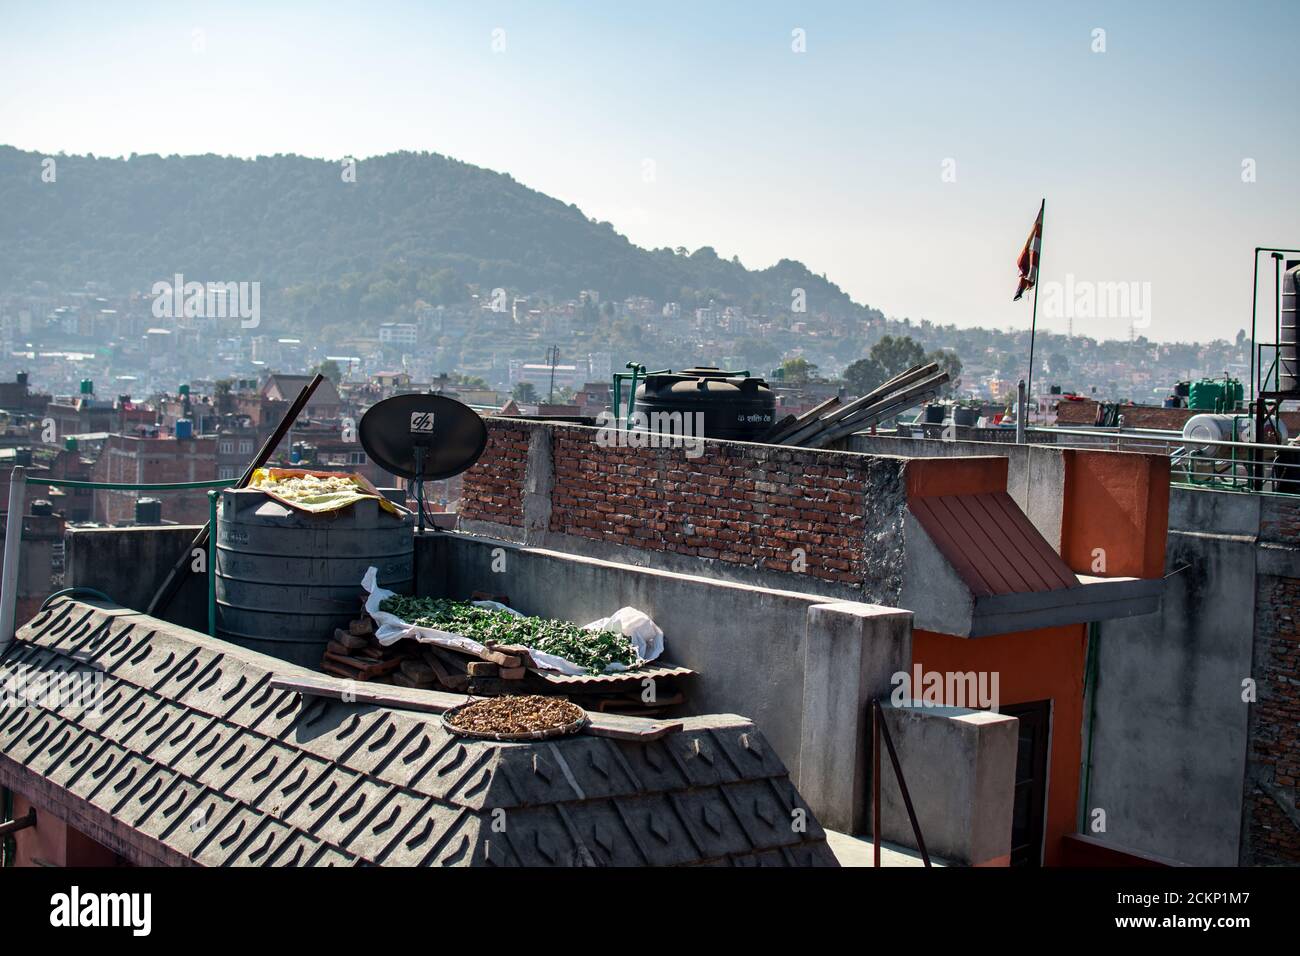 Bhaktapur, Kathmandu, Nepal - December 23, 2019: Cityscape view from a roof top over fruits and vegetables drying in the sun with the city in the back Stock Photo